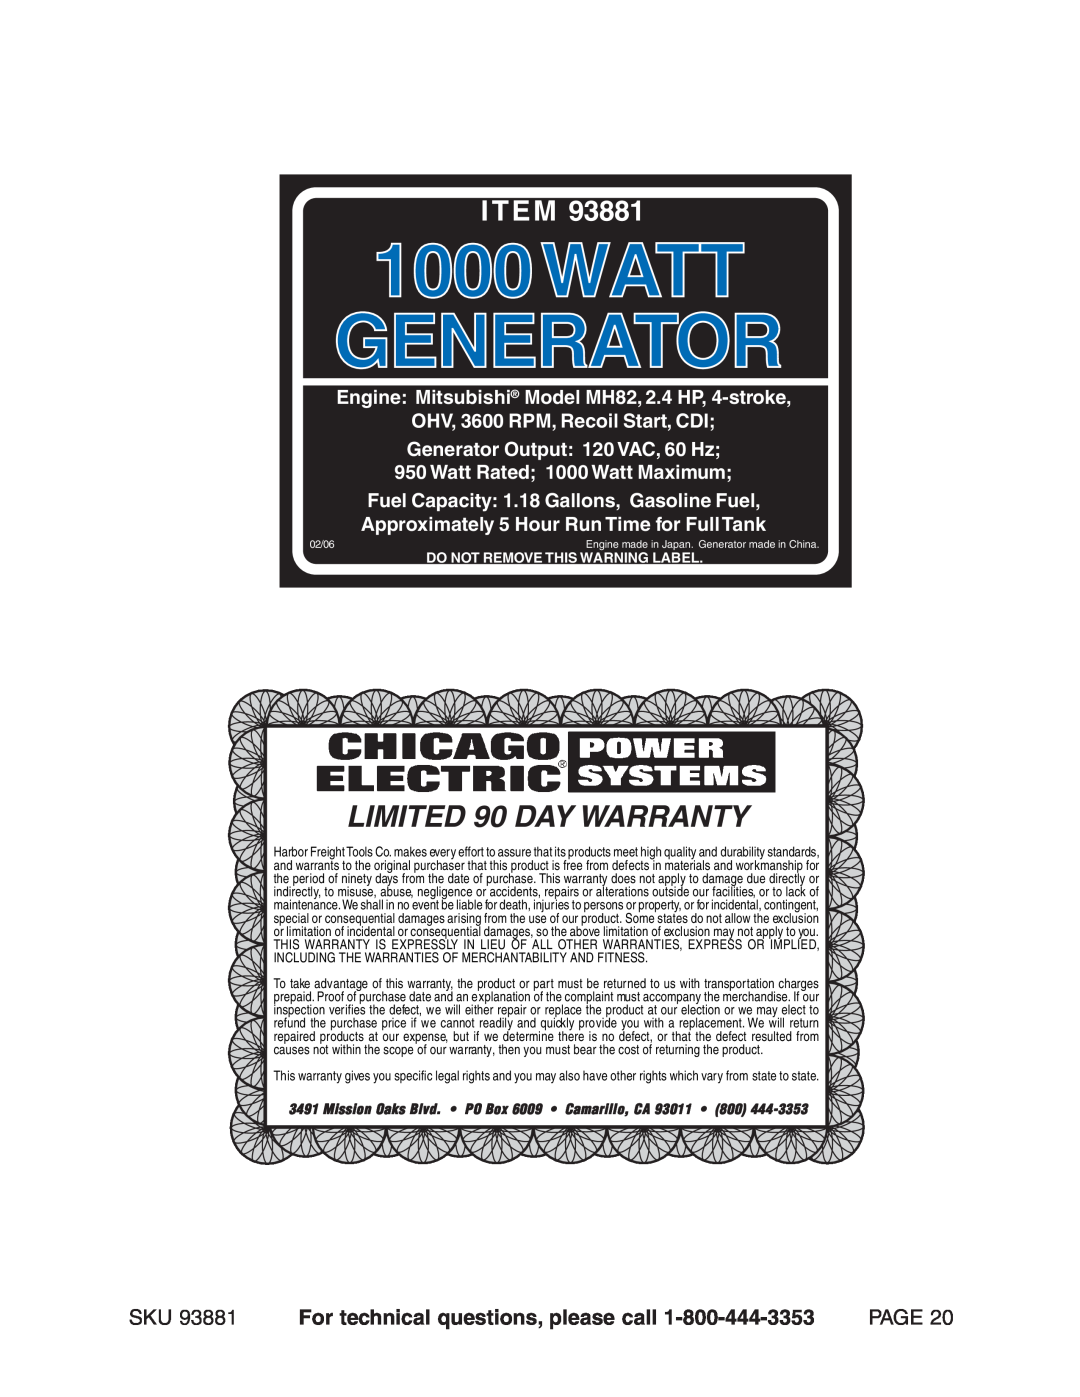 Chicago Electric 93881 1000WATT GENERATOR, LIMITED 90 DAY WARRANTY, For technical questions, please call, Page 